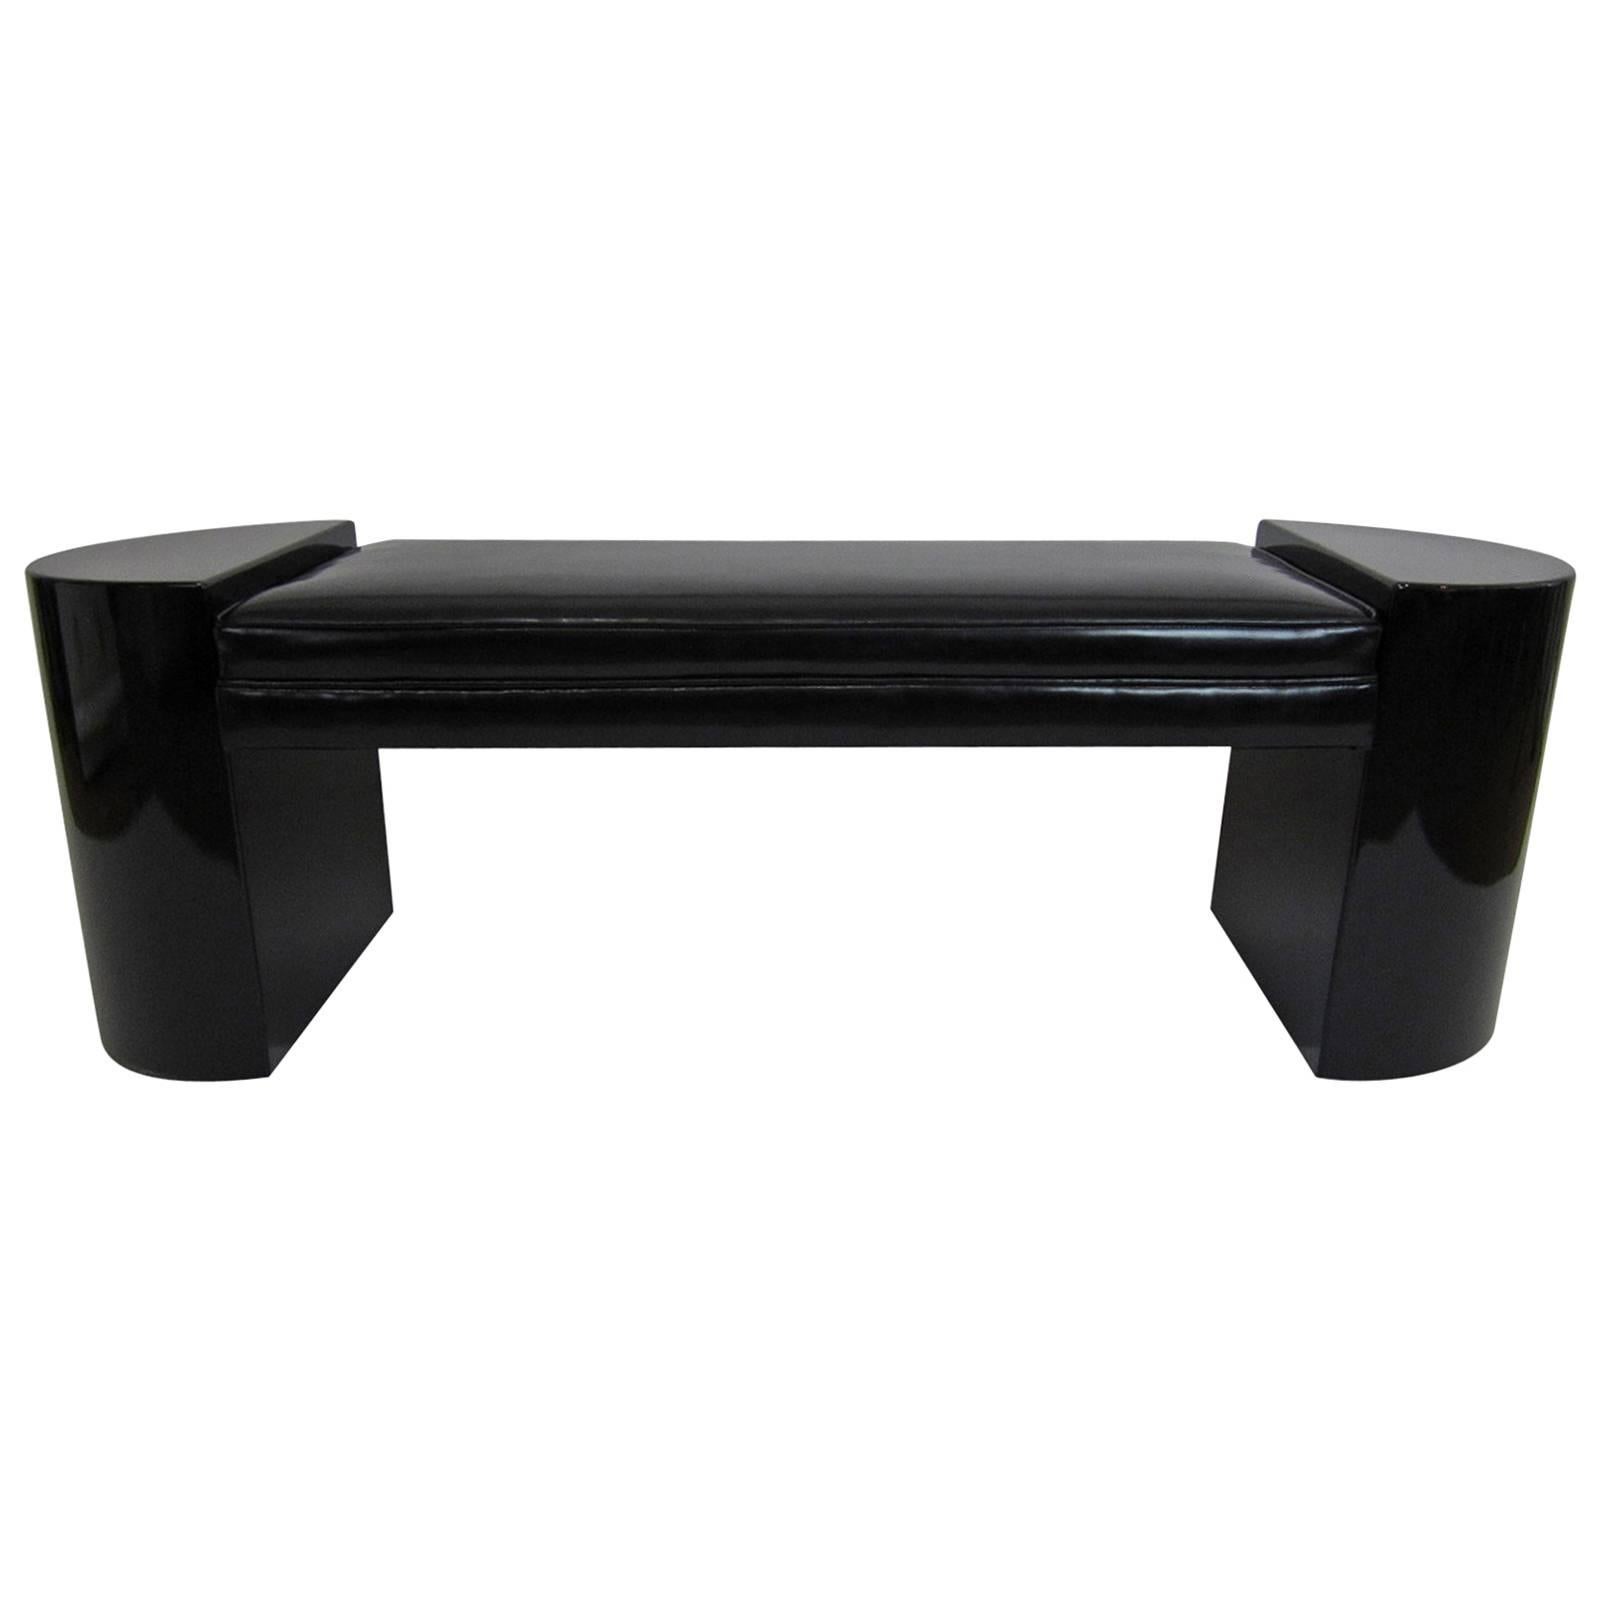 Bench in Black Patent Leather and Black Lacquer